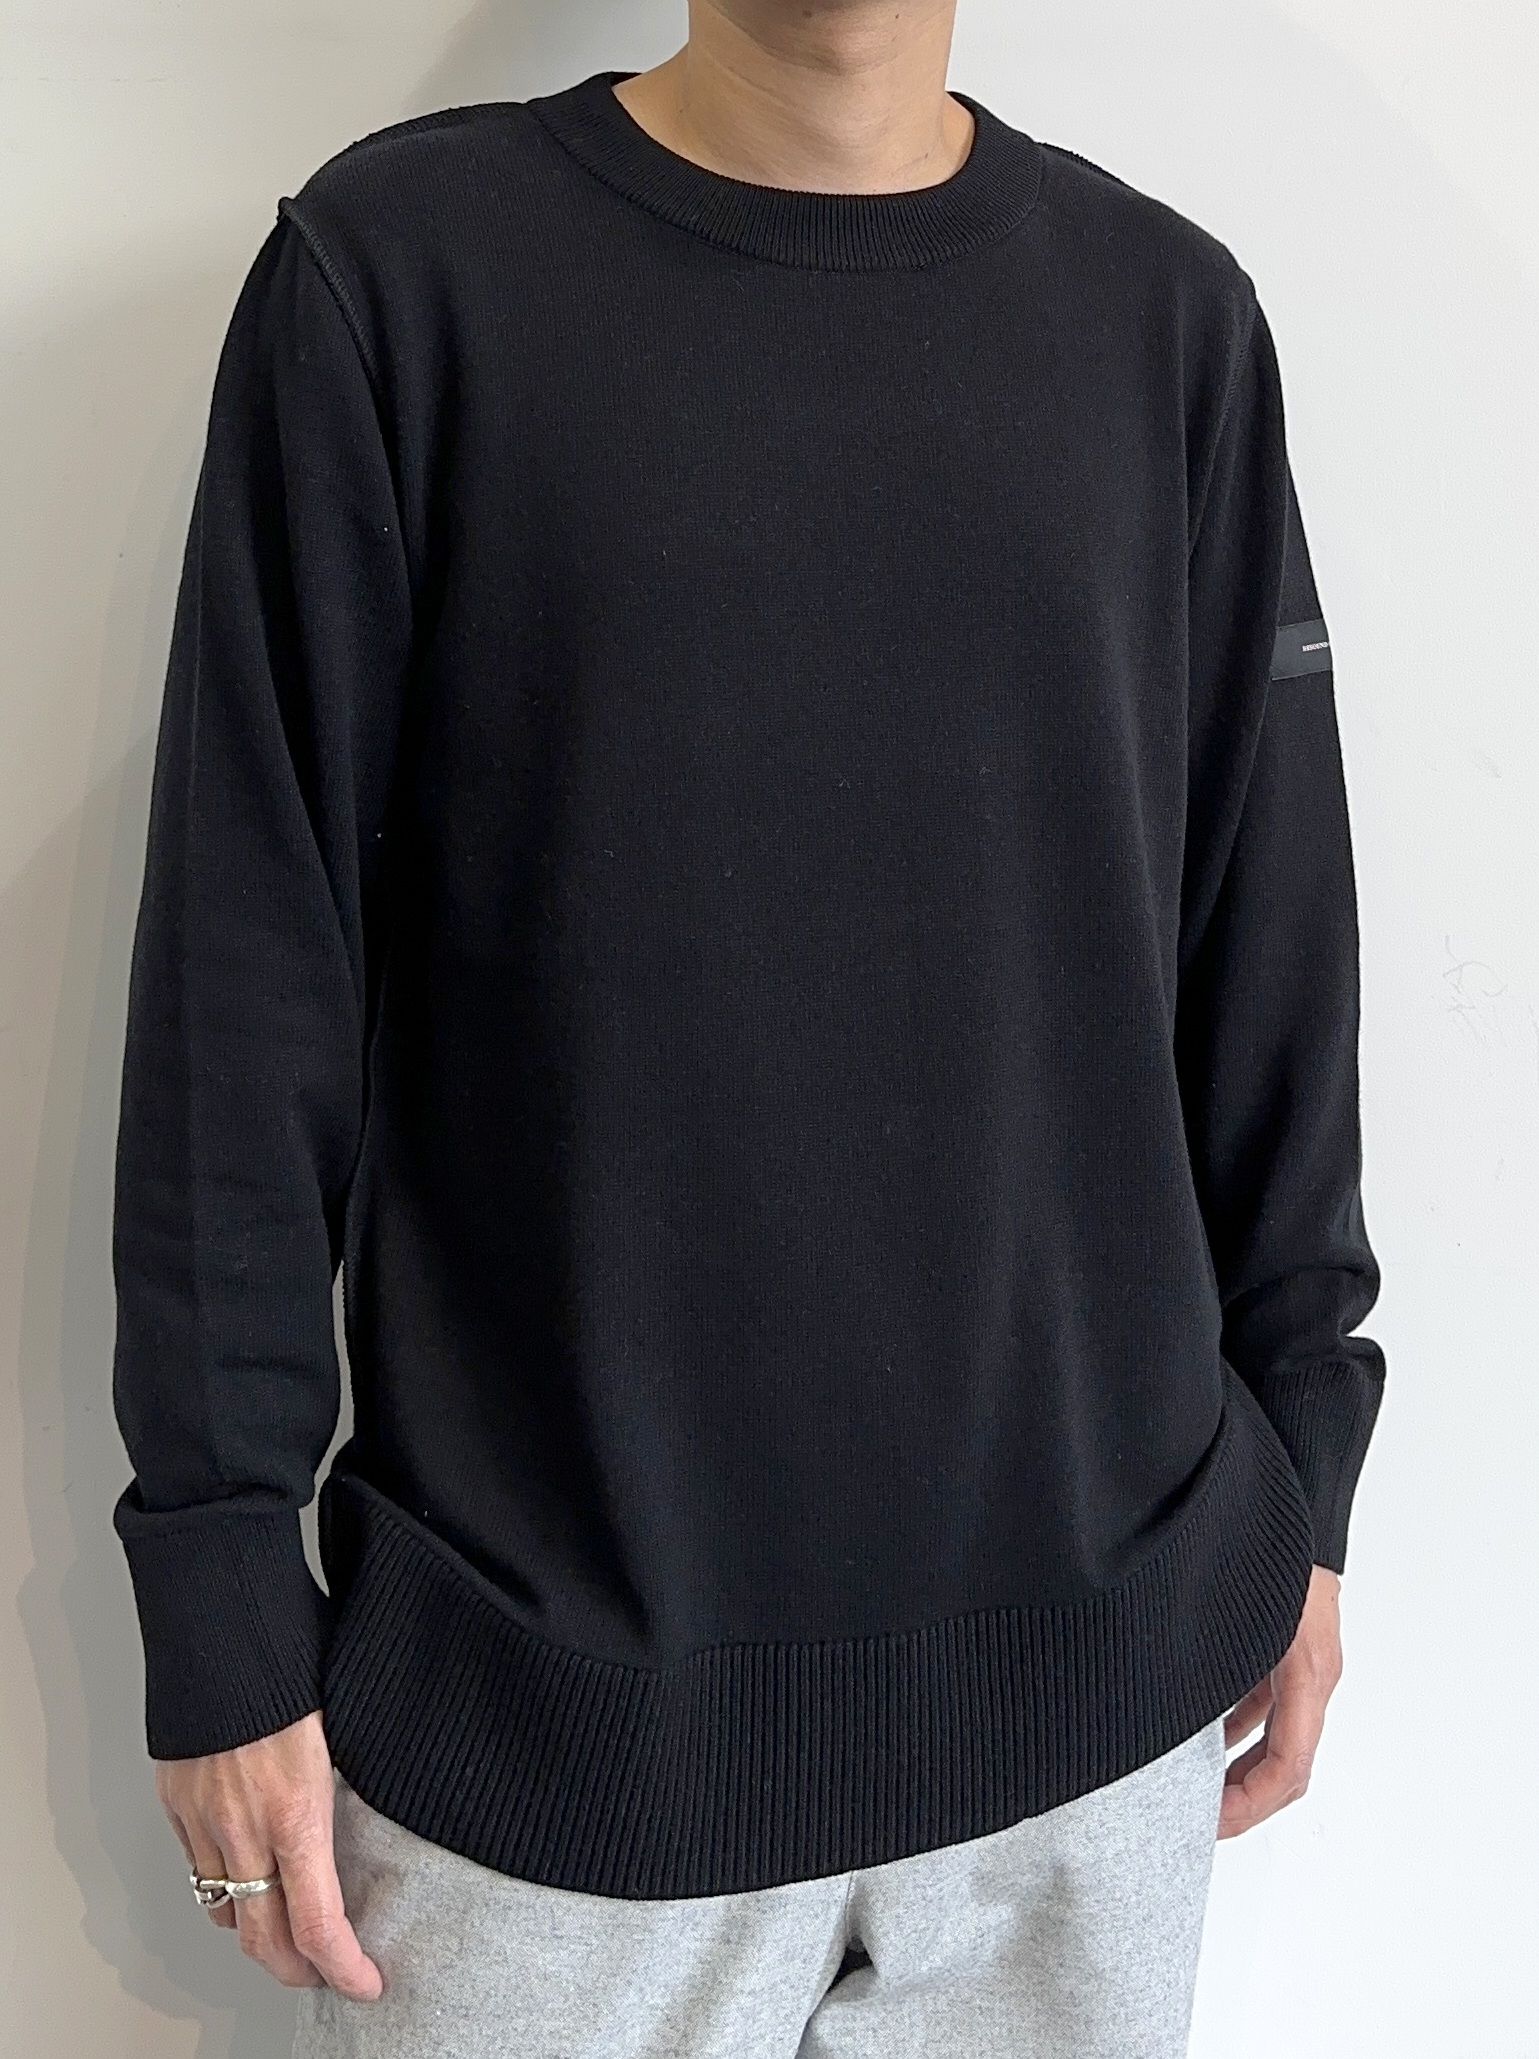 RESOUND CLOTHING - OUT SEAM SWEATER / RC30-K-001 / アウト